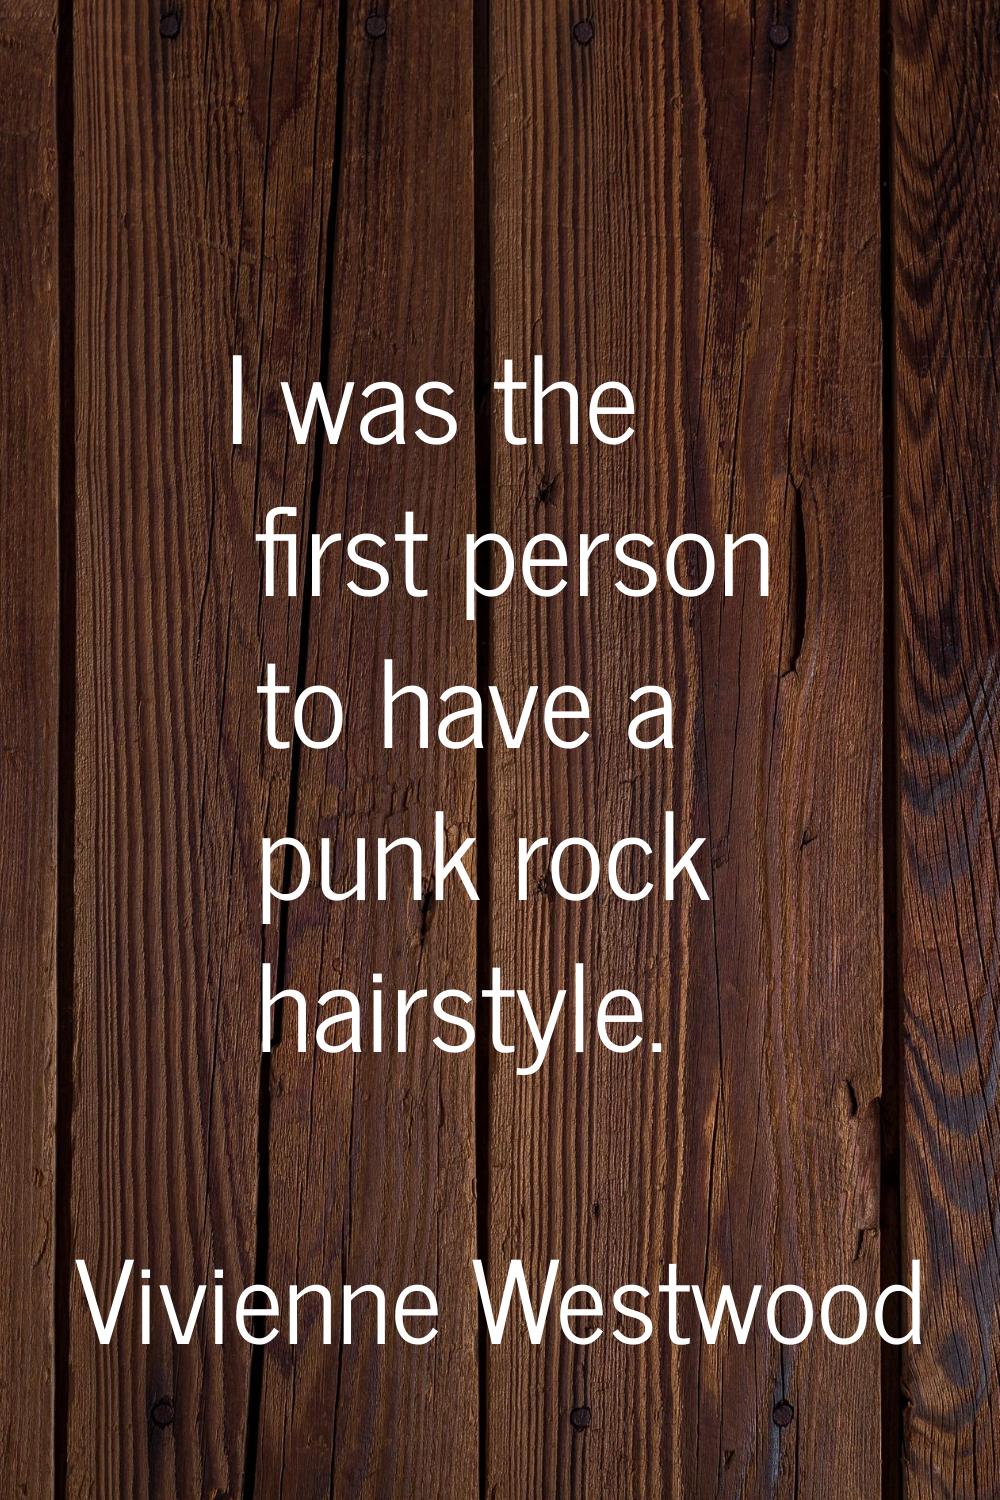 I was the first person to have a punk rock hairstyle.